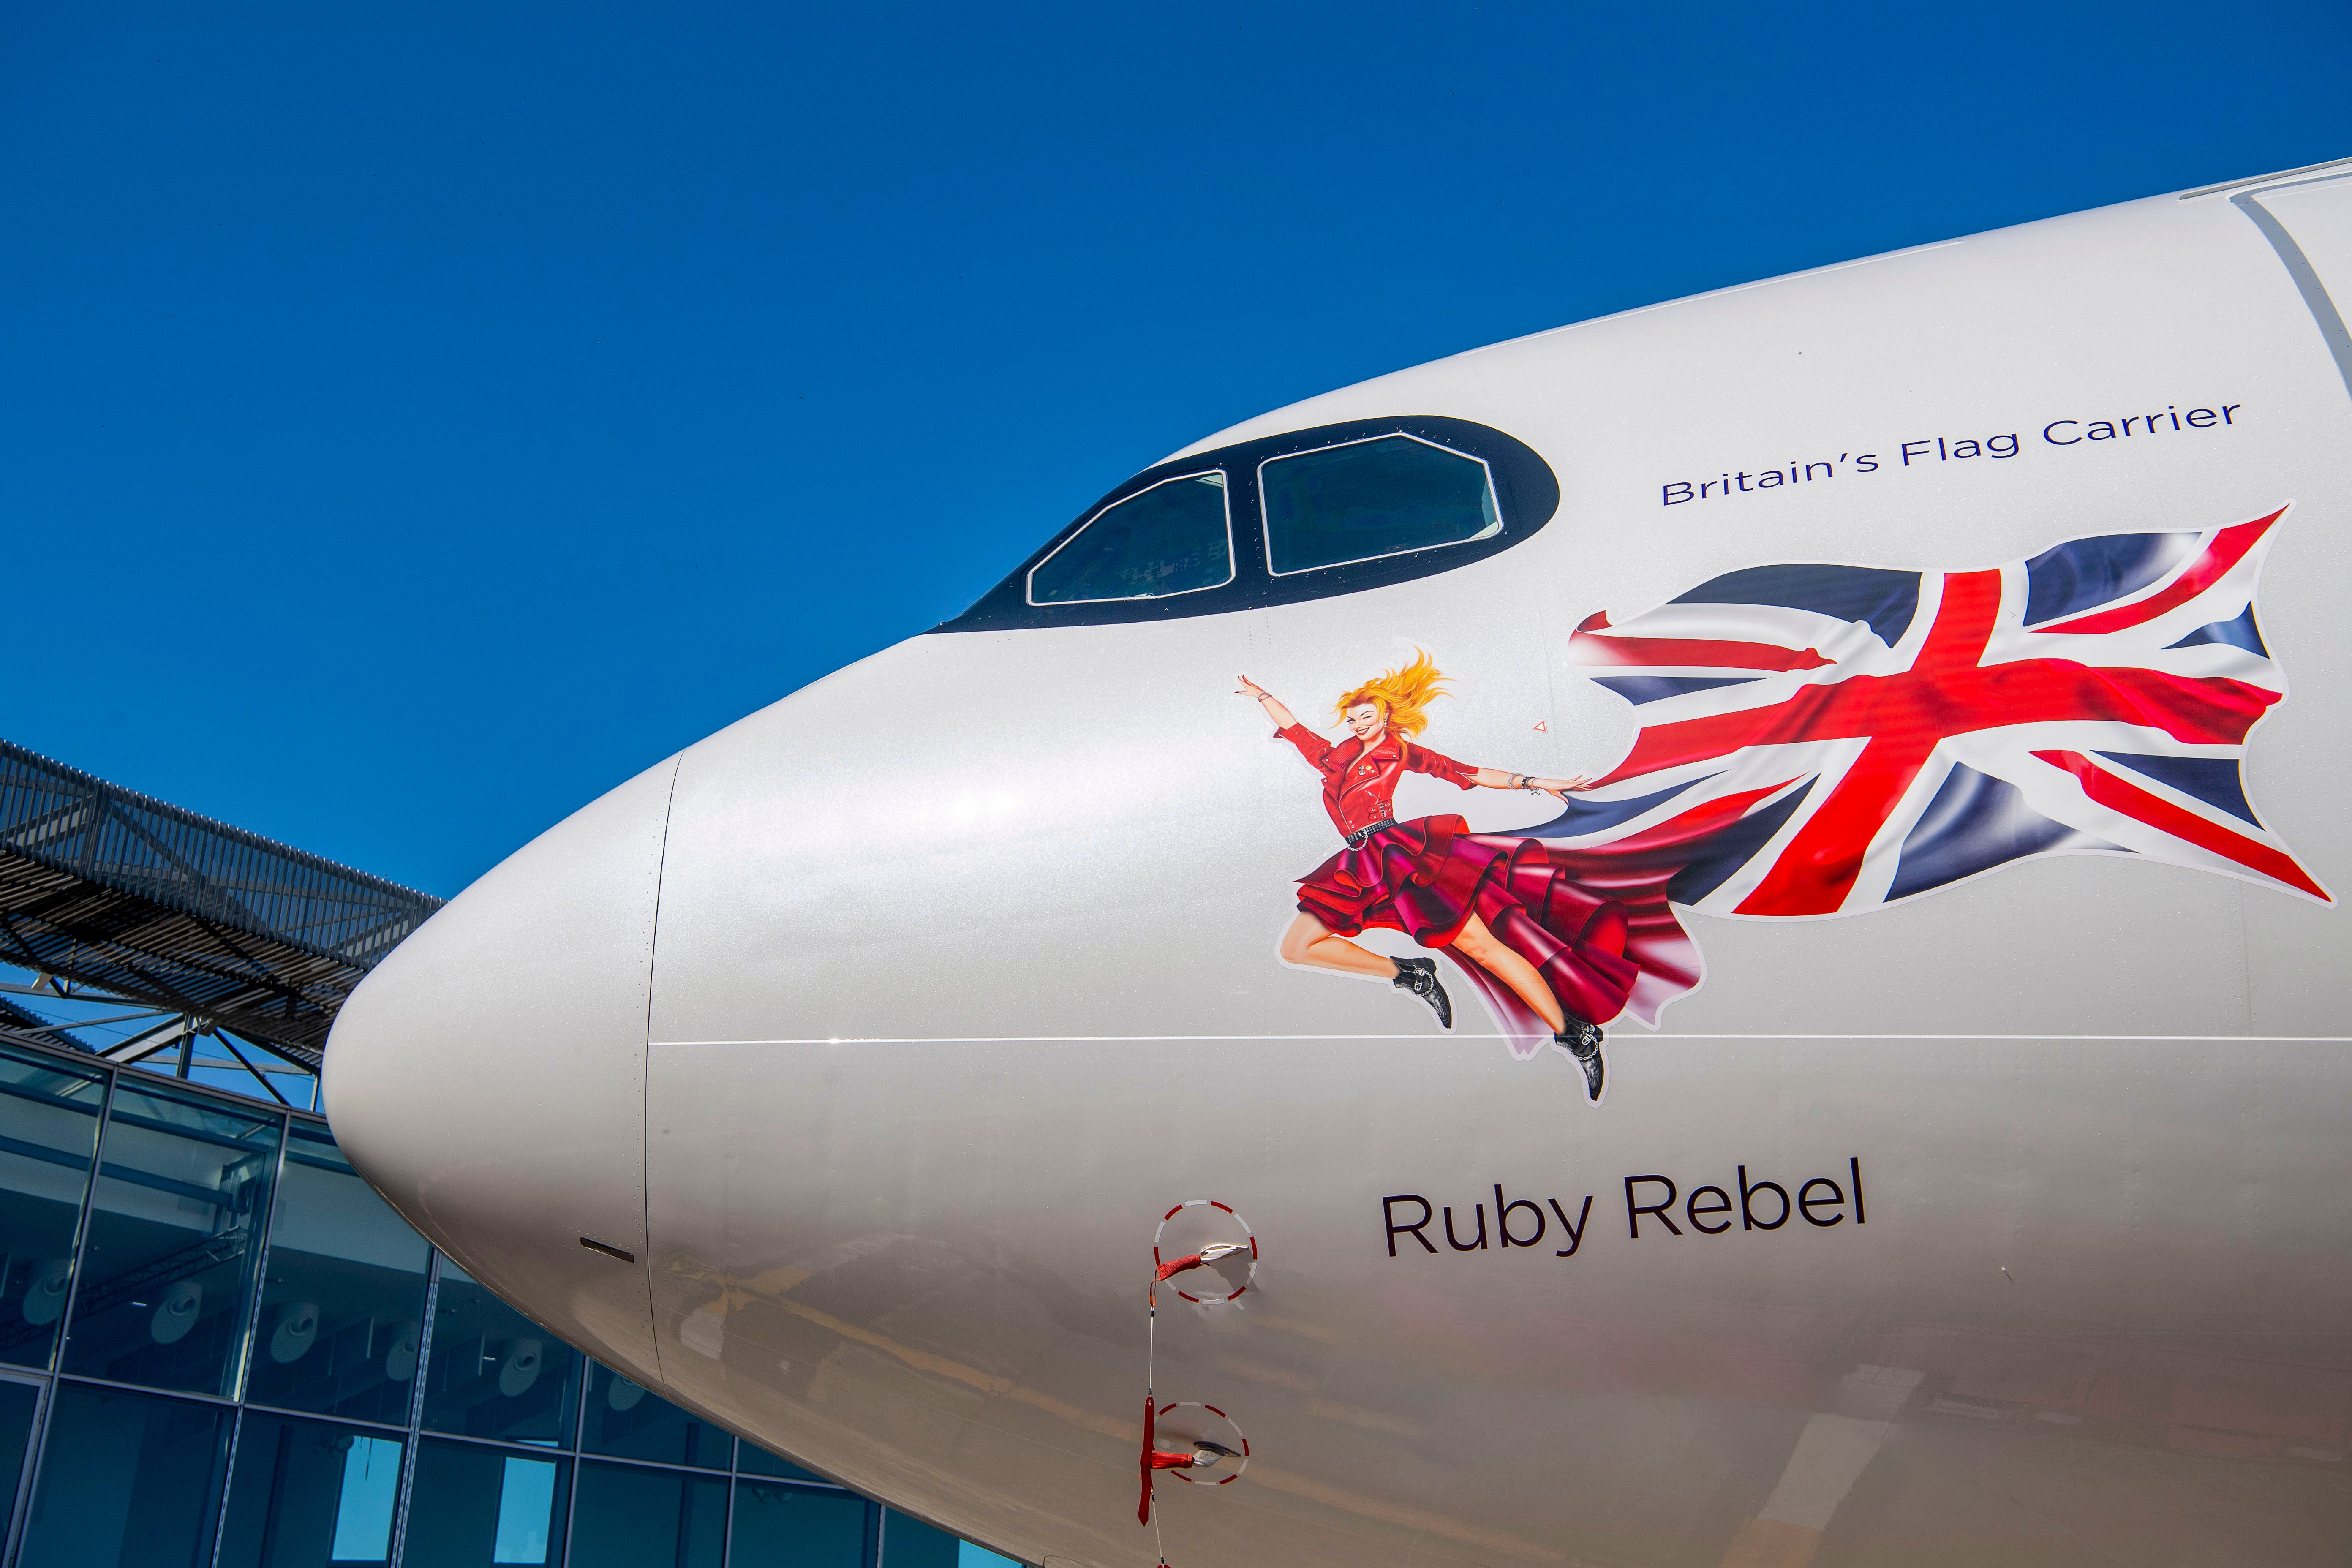 The icon Ruby Rebel has been launched on their latest aircraft to celebrate the airline’s 40th anniversary